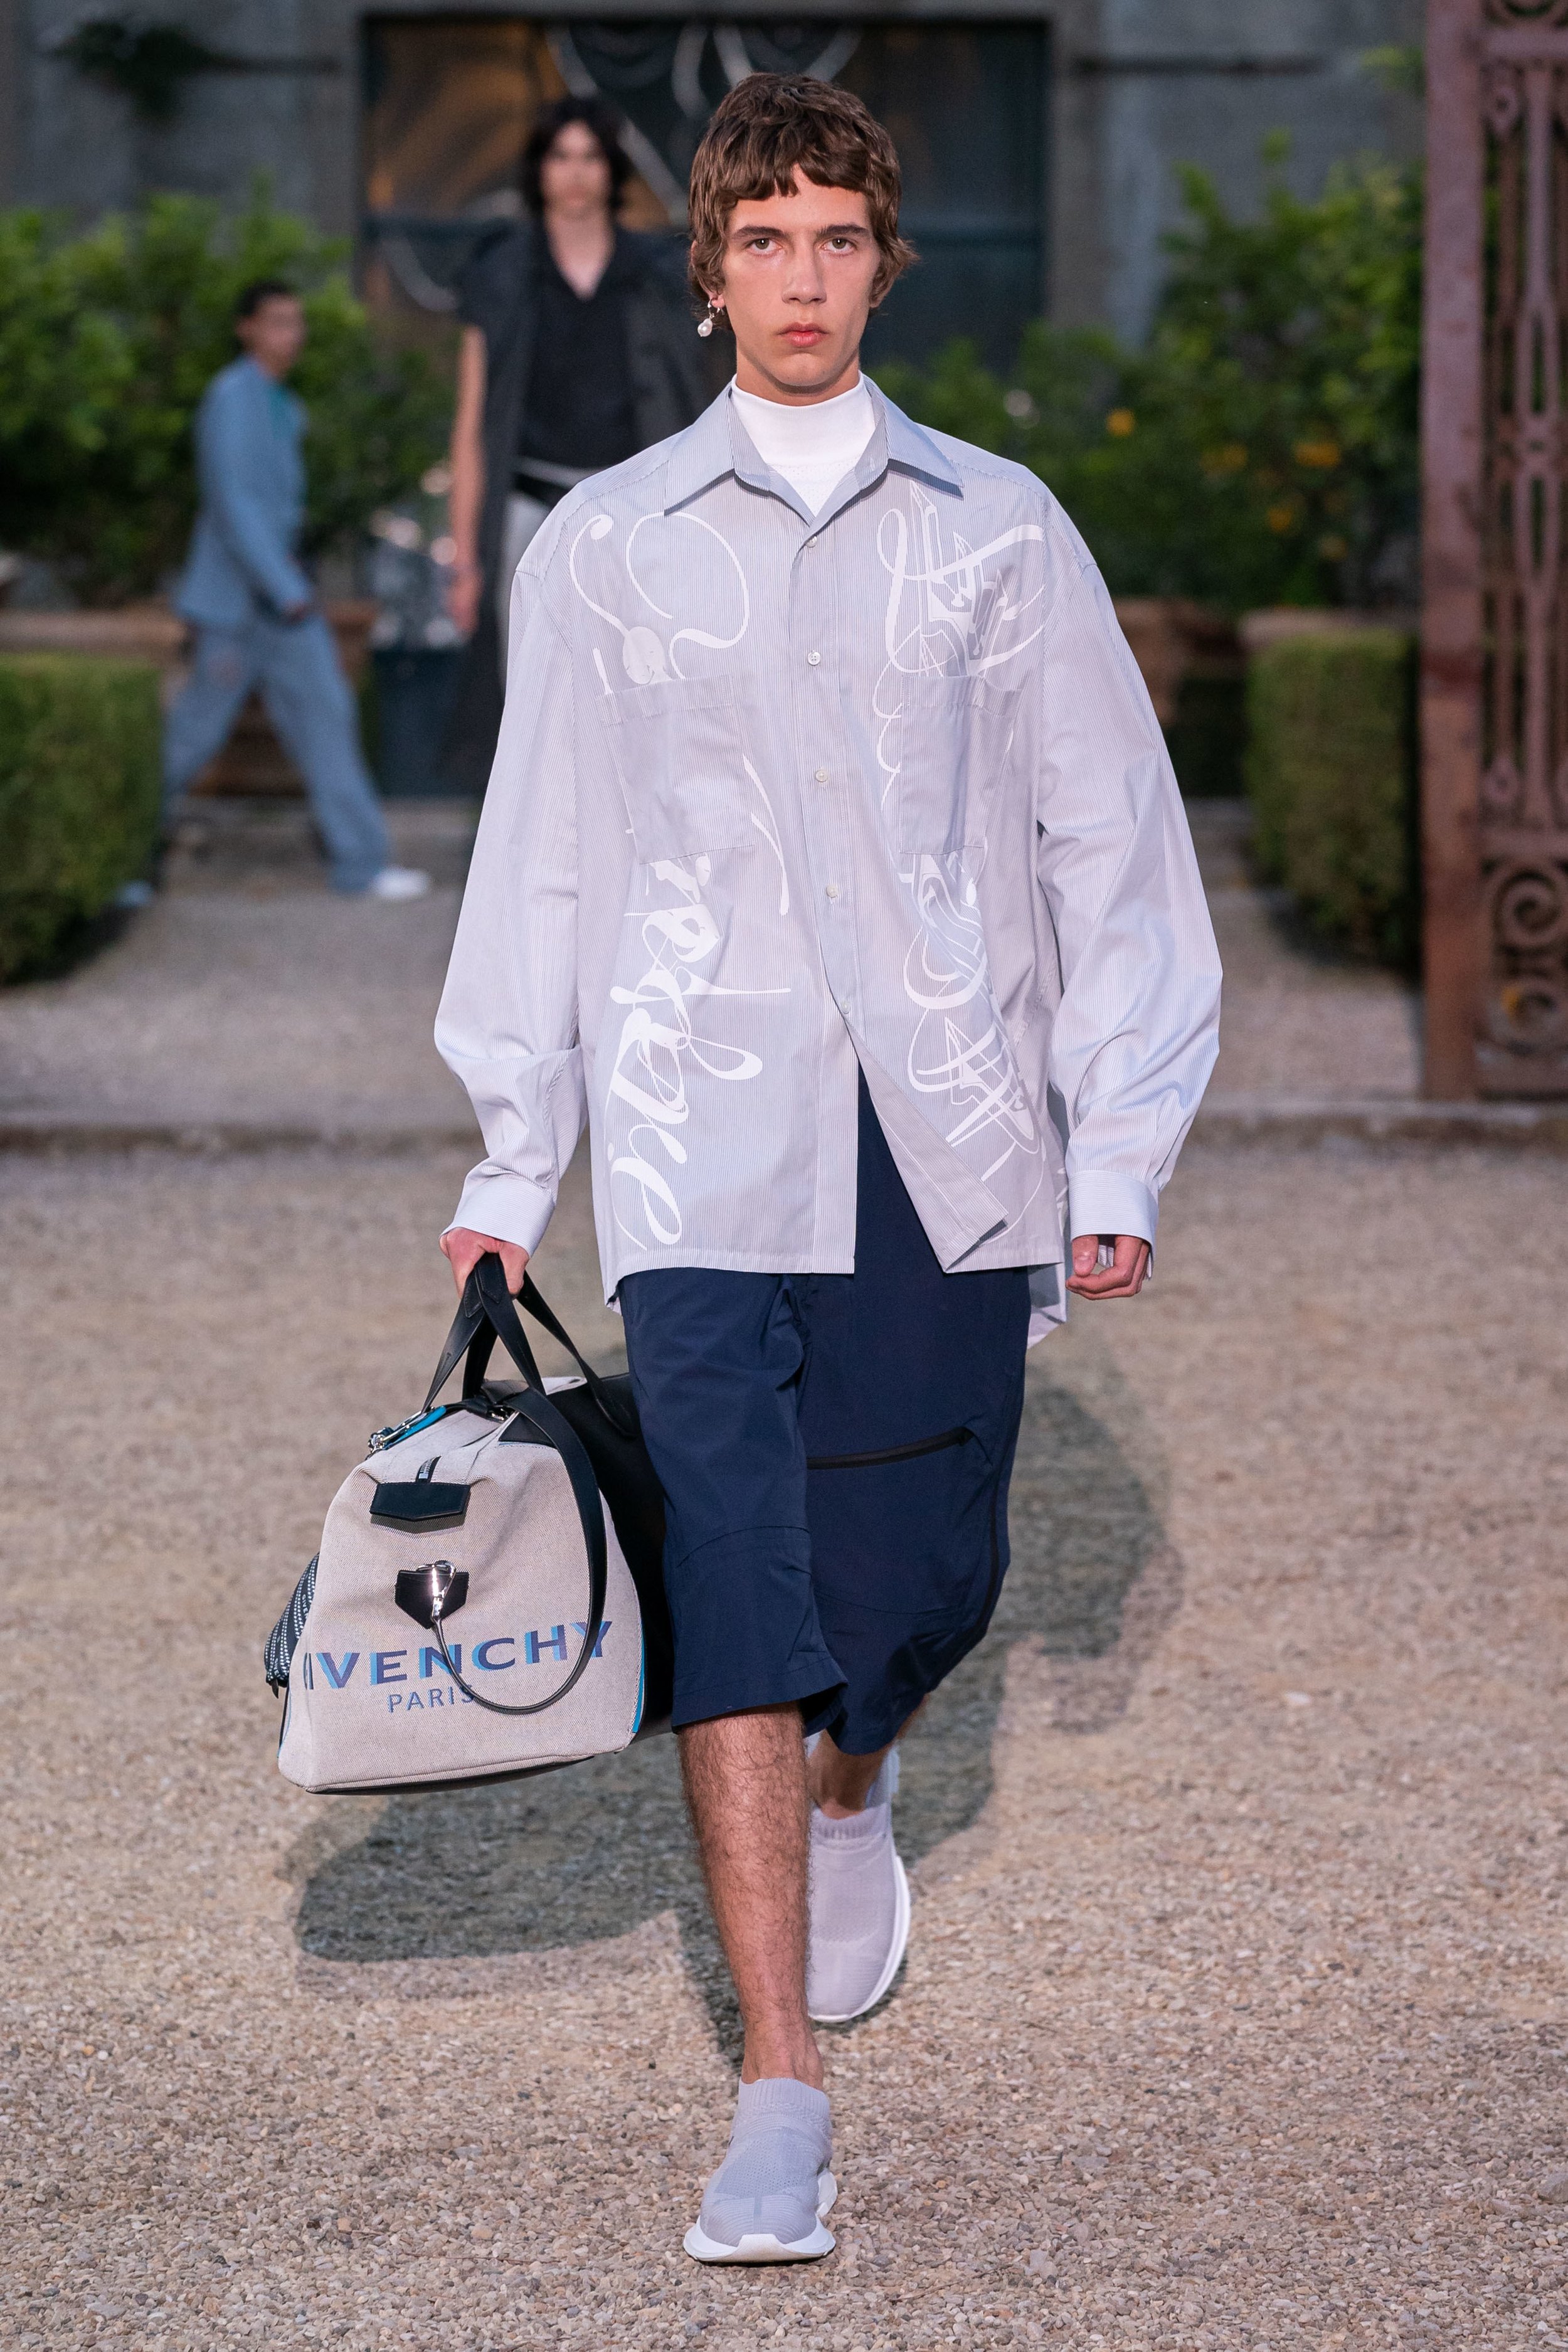 Behind_The_Blinds_Magazine_Givenchy_Men_SS20_Pitti_ALE0341.jpg